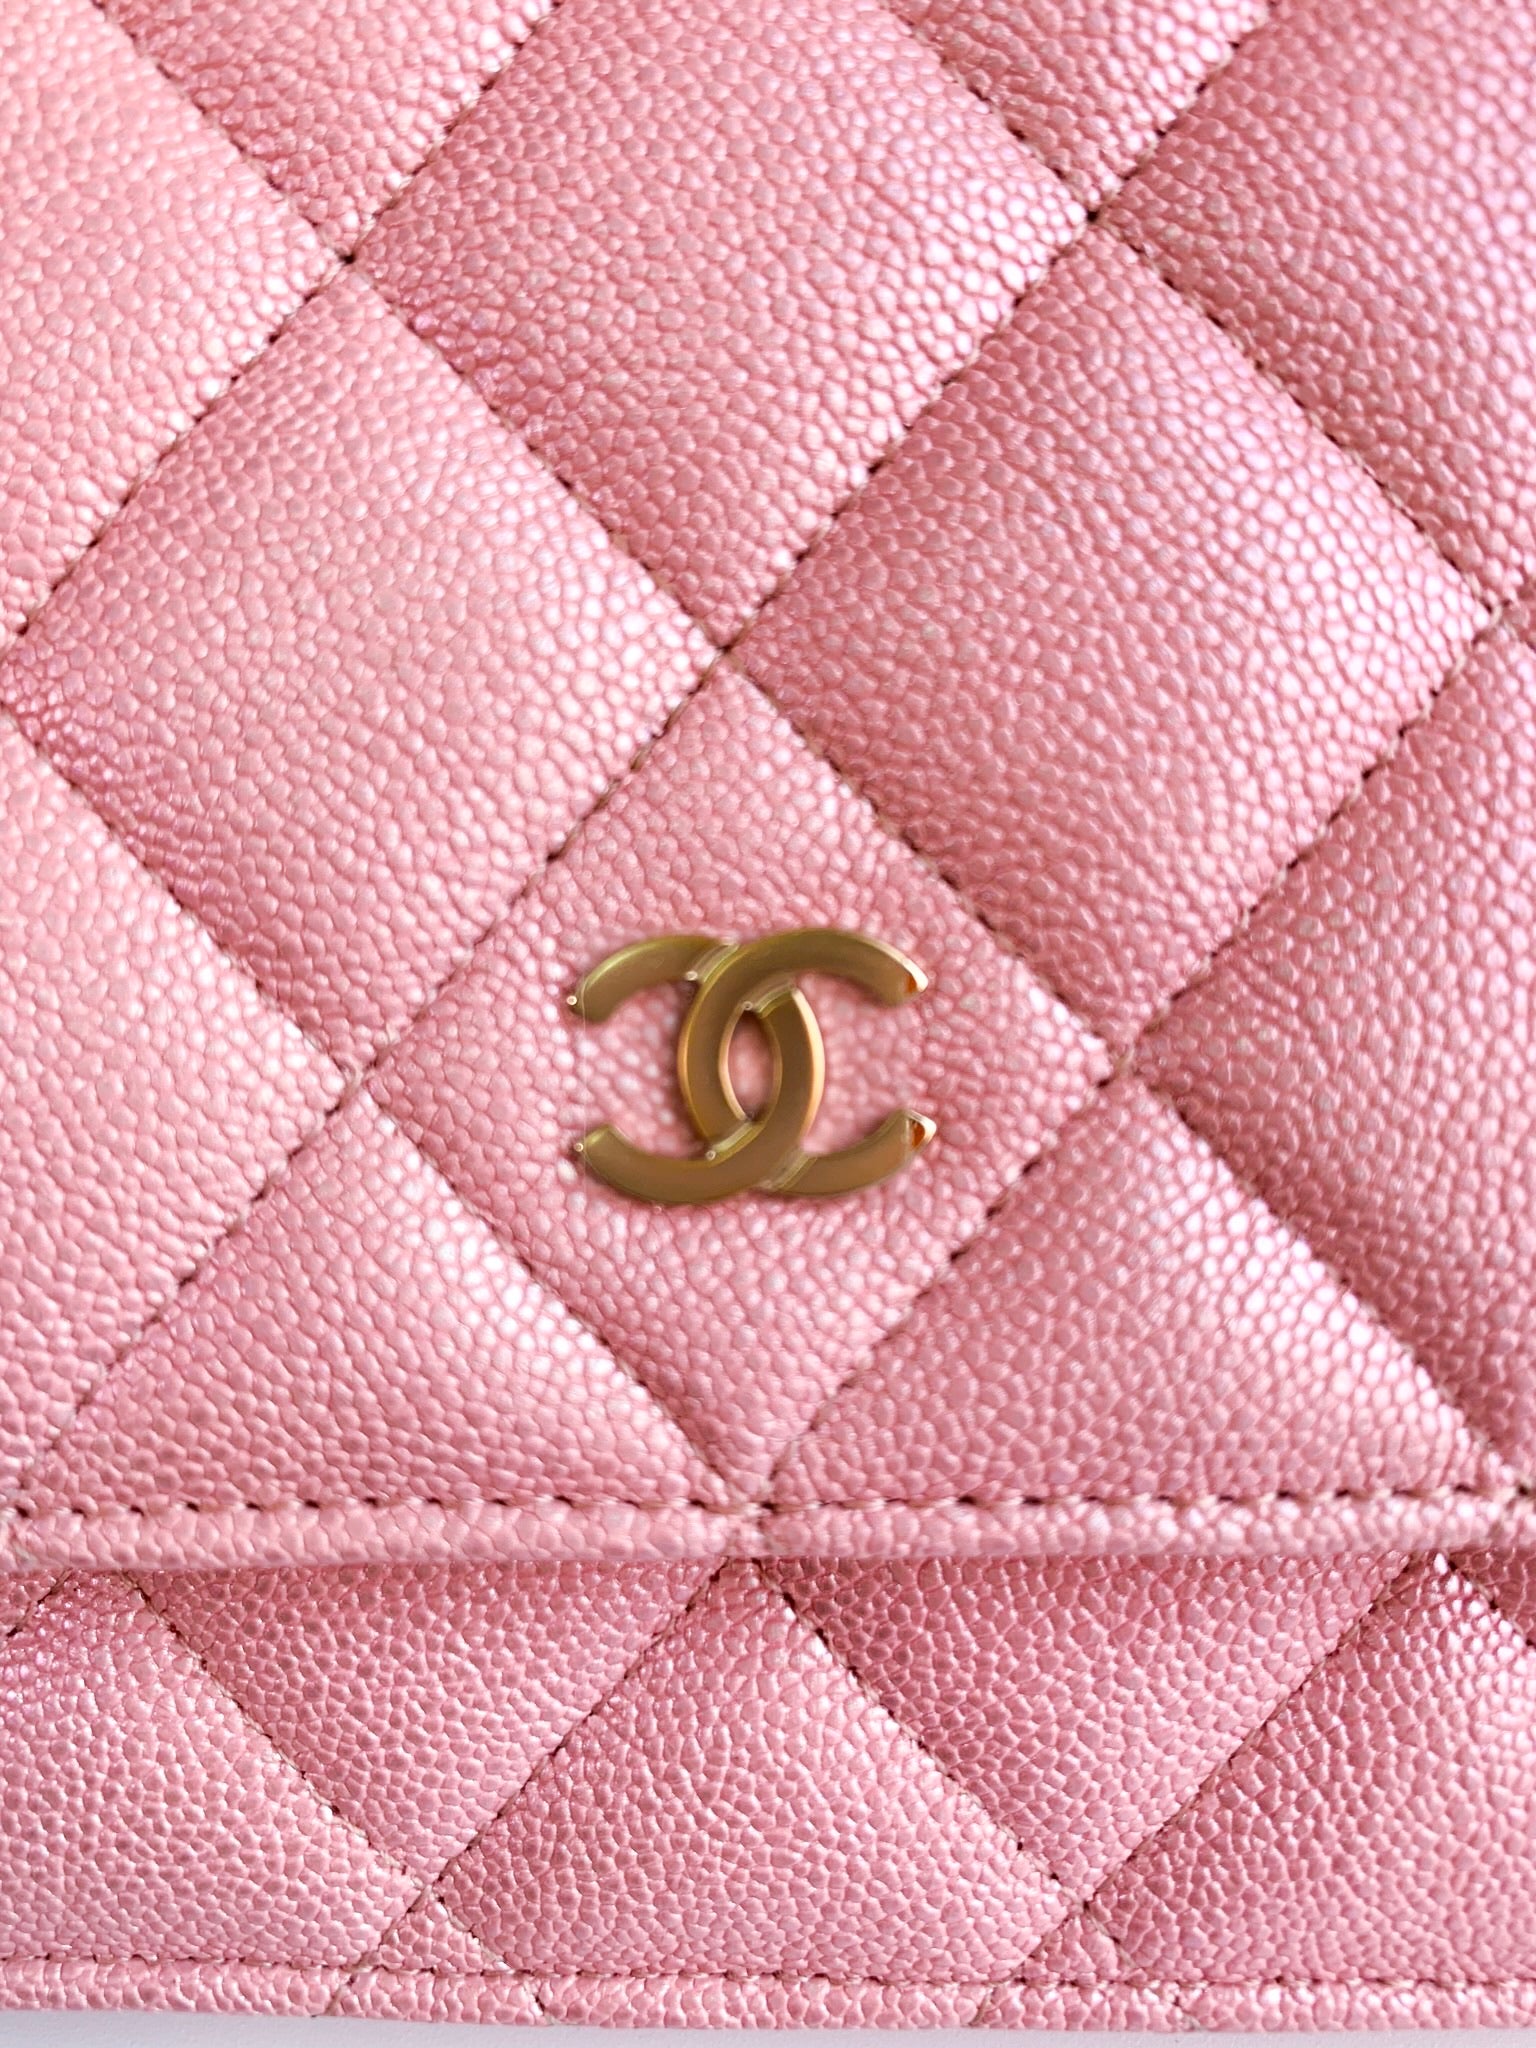 Chanel Compact Wallet, Caviar, Light pink LGHW - Laulay Luxury